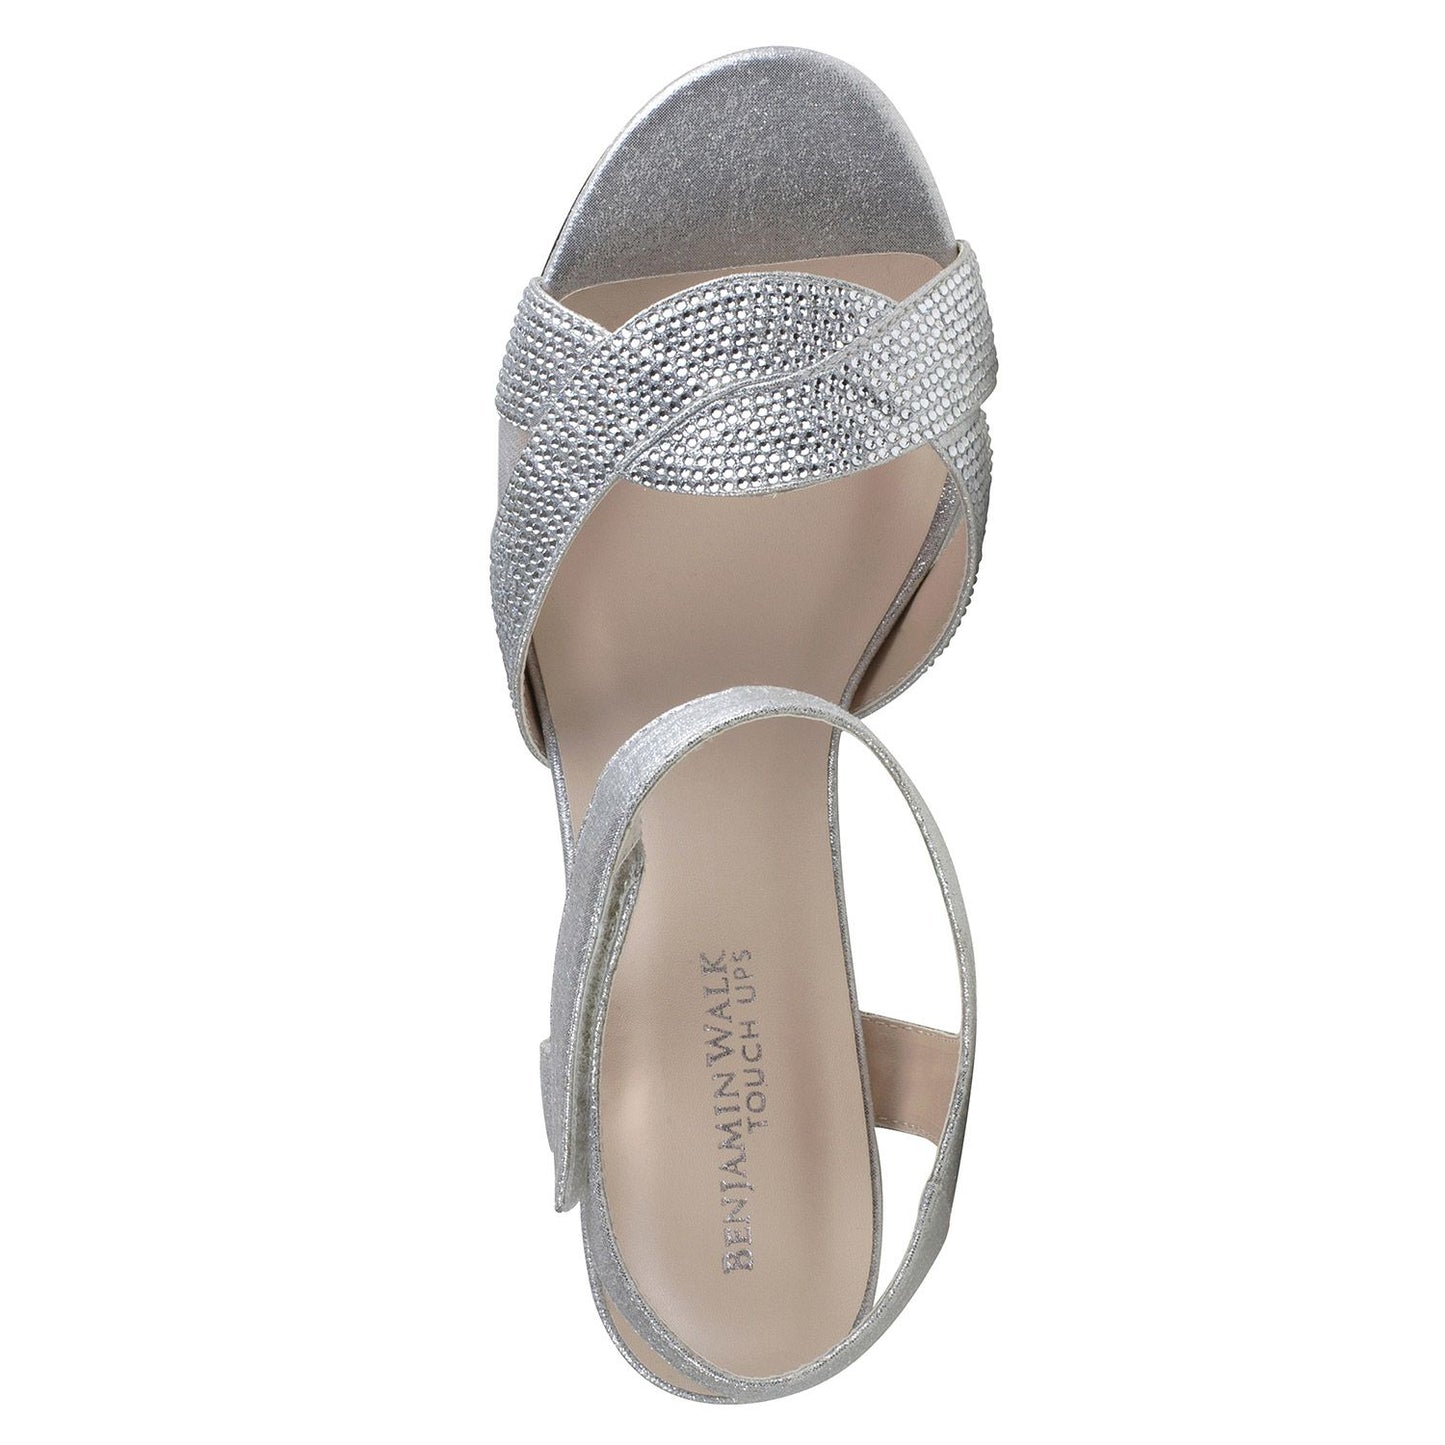 Overhead view of 2.25 inch silver shimmer shoe with block heel